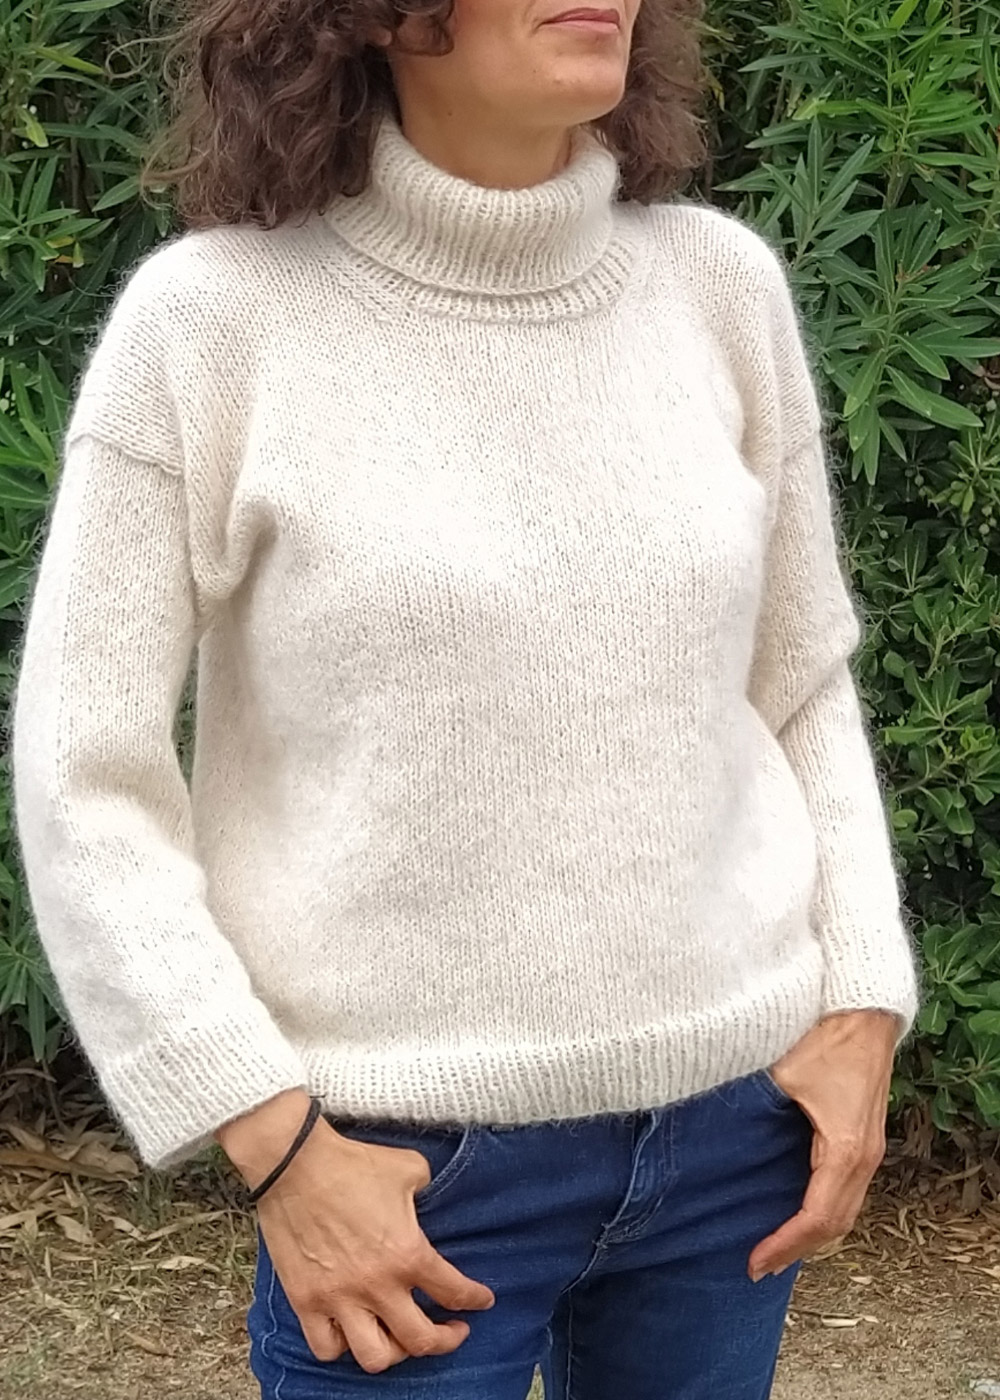 Sweater Knit Pattern easy and amazing – Through the Stitch